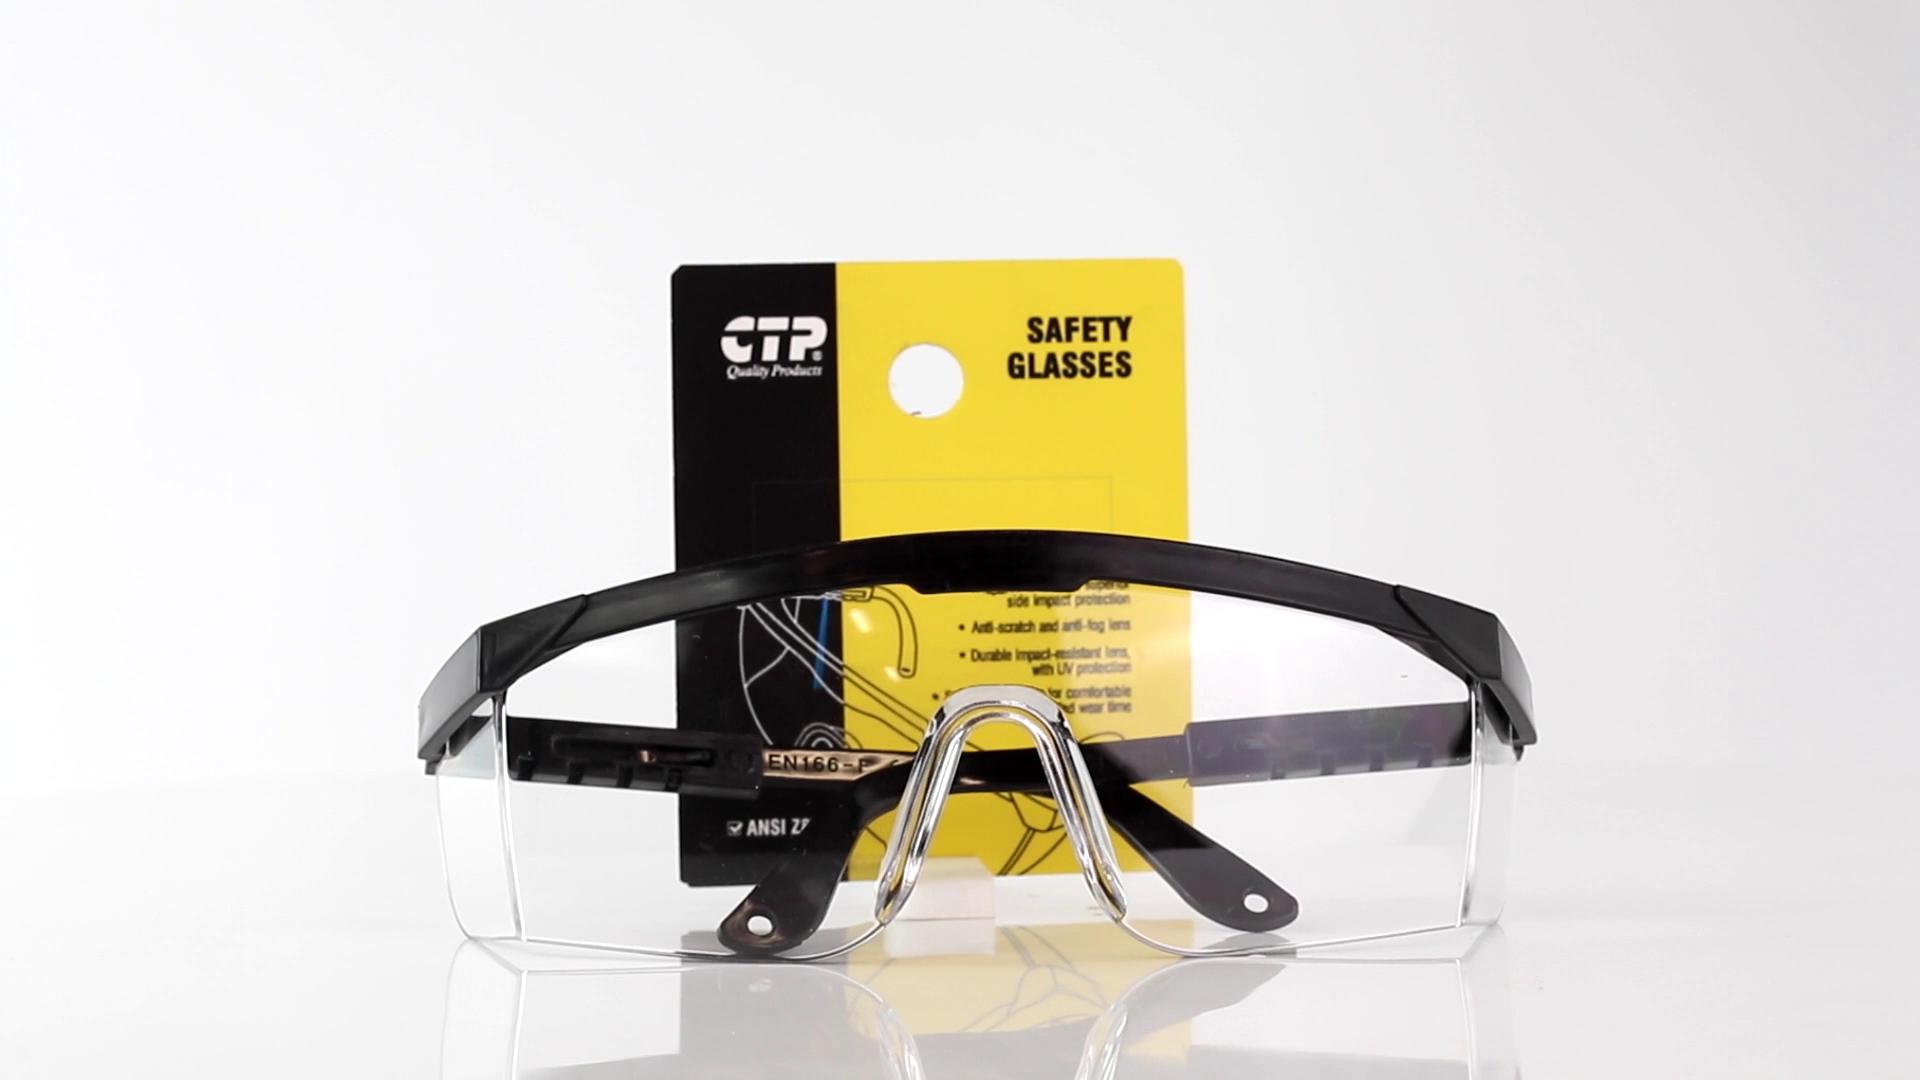 CTP SAFETY GLASSES